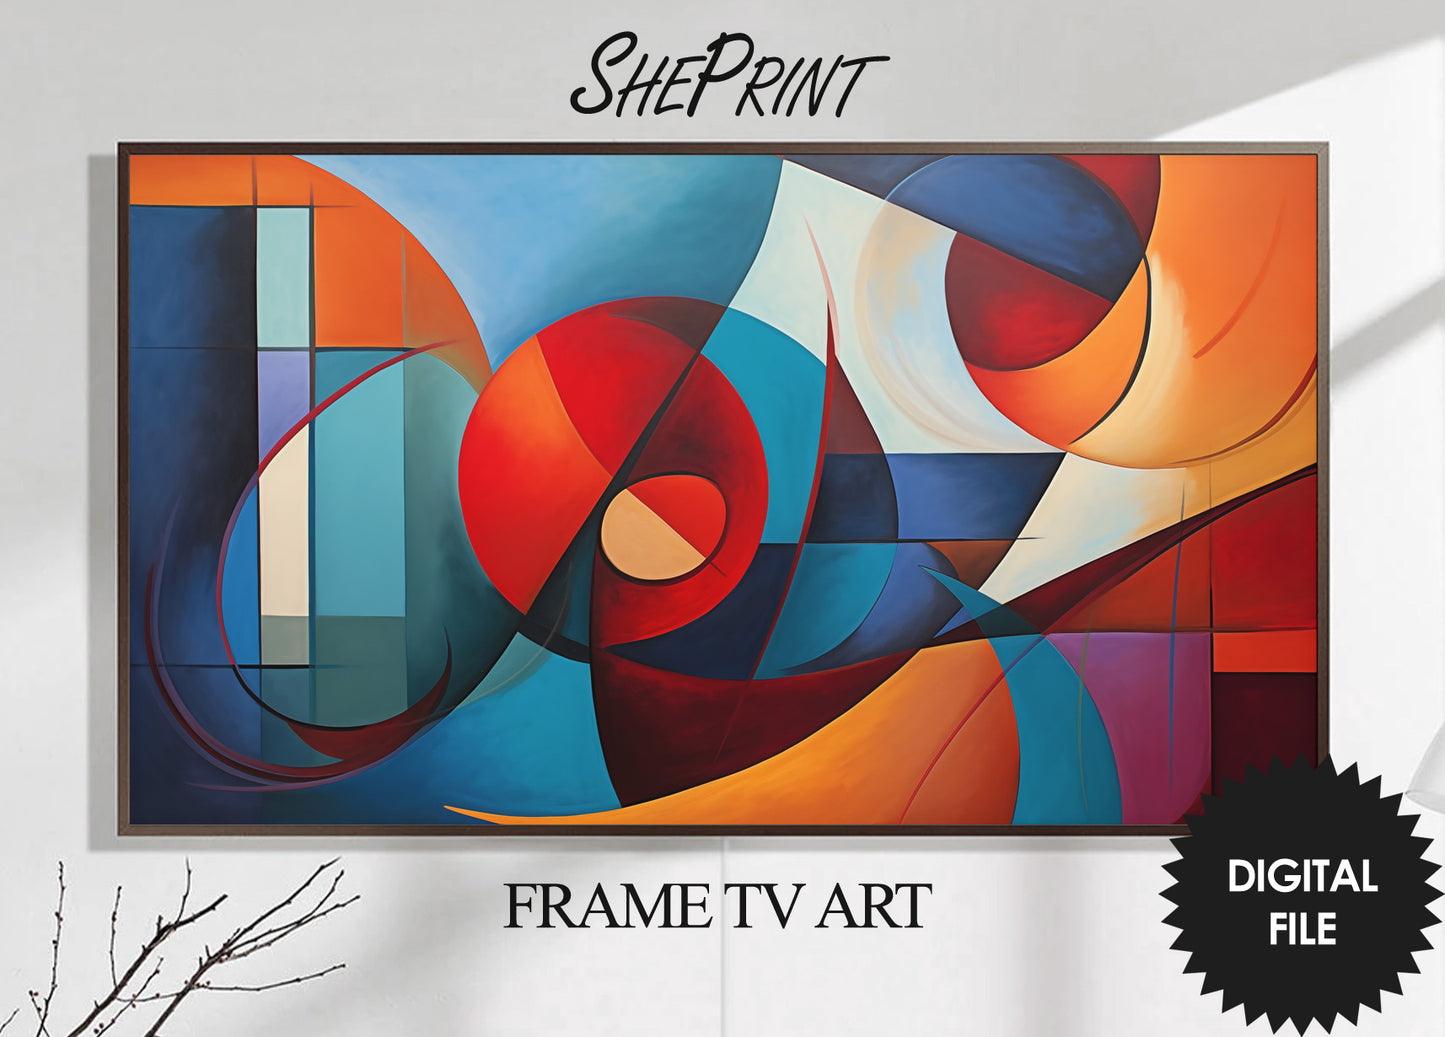 Vertical & Horizontal Frame TV Art, Curvy Shapes Abstract Art, preview on Samsung Frame TV, closer view